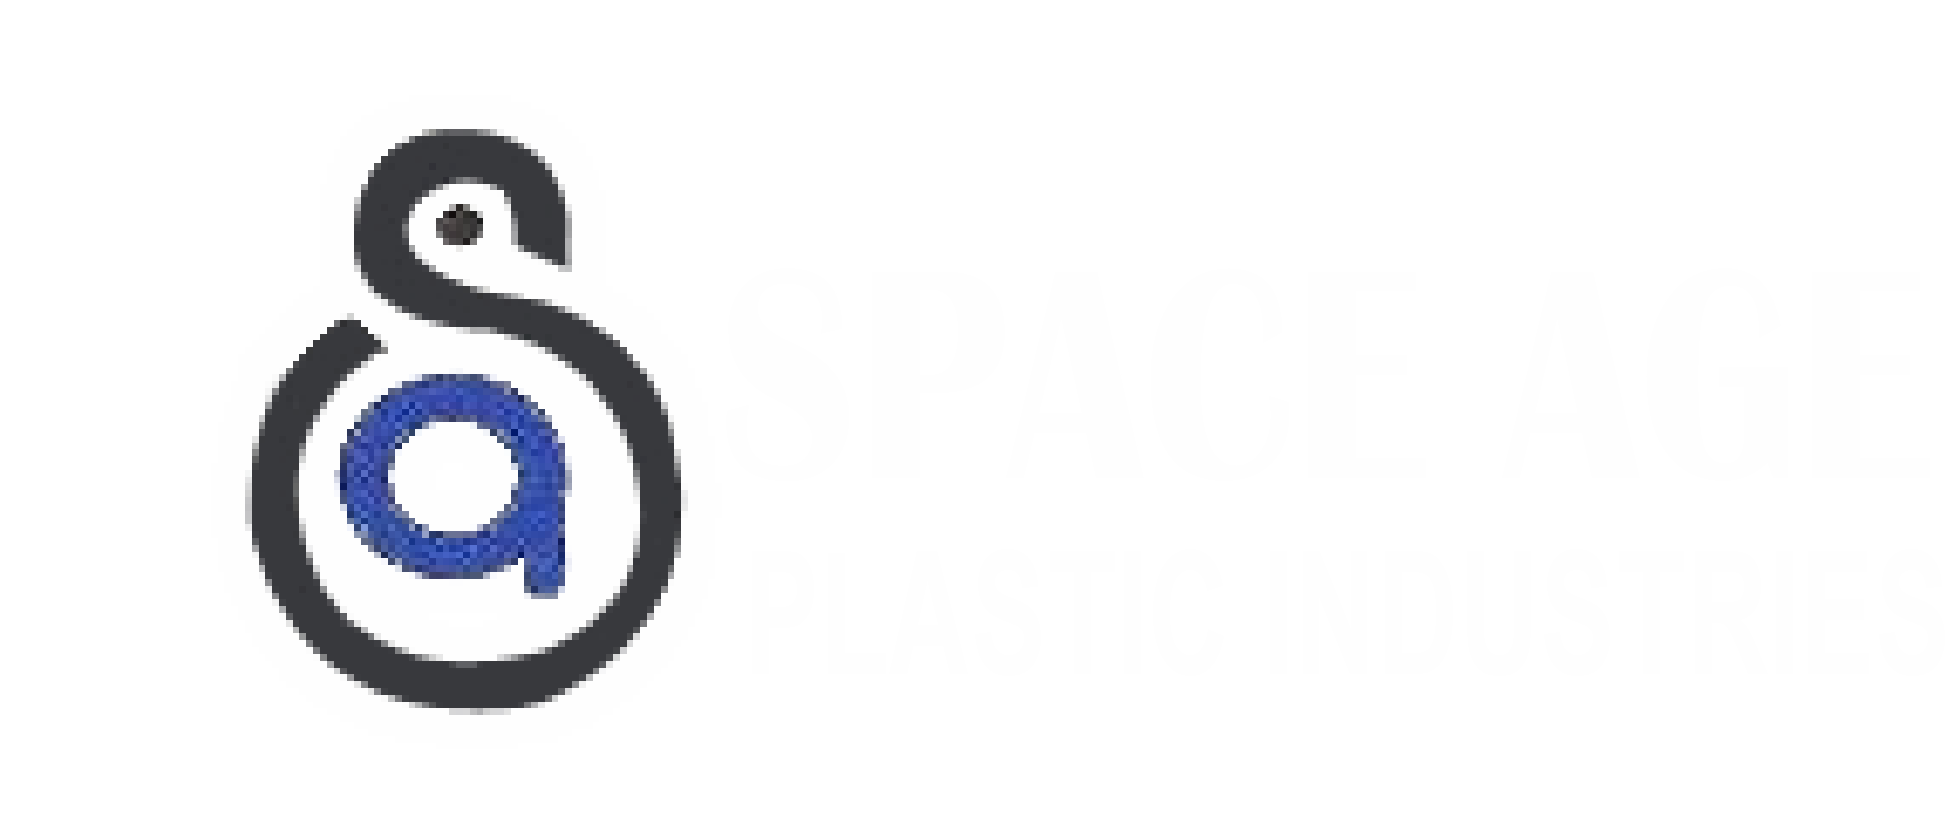 space-age-plastic-industry-logo